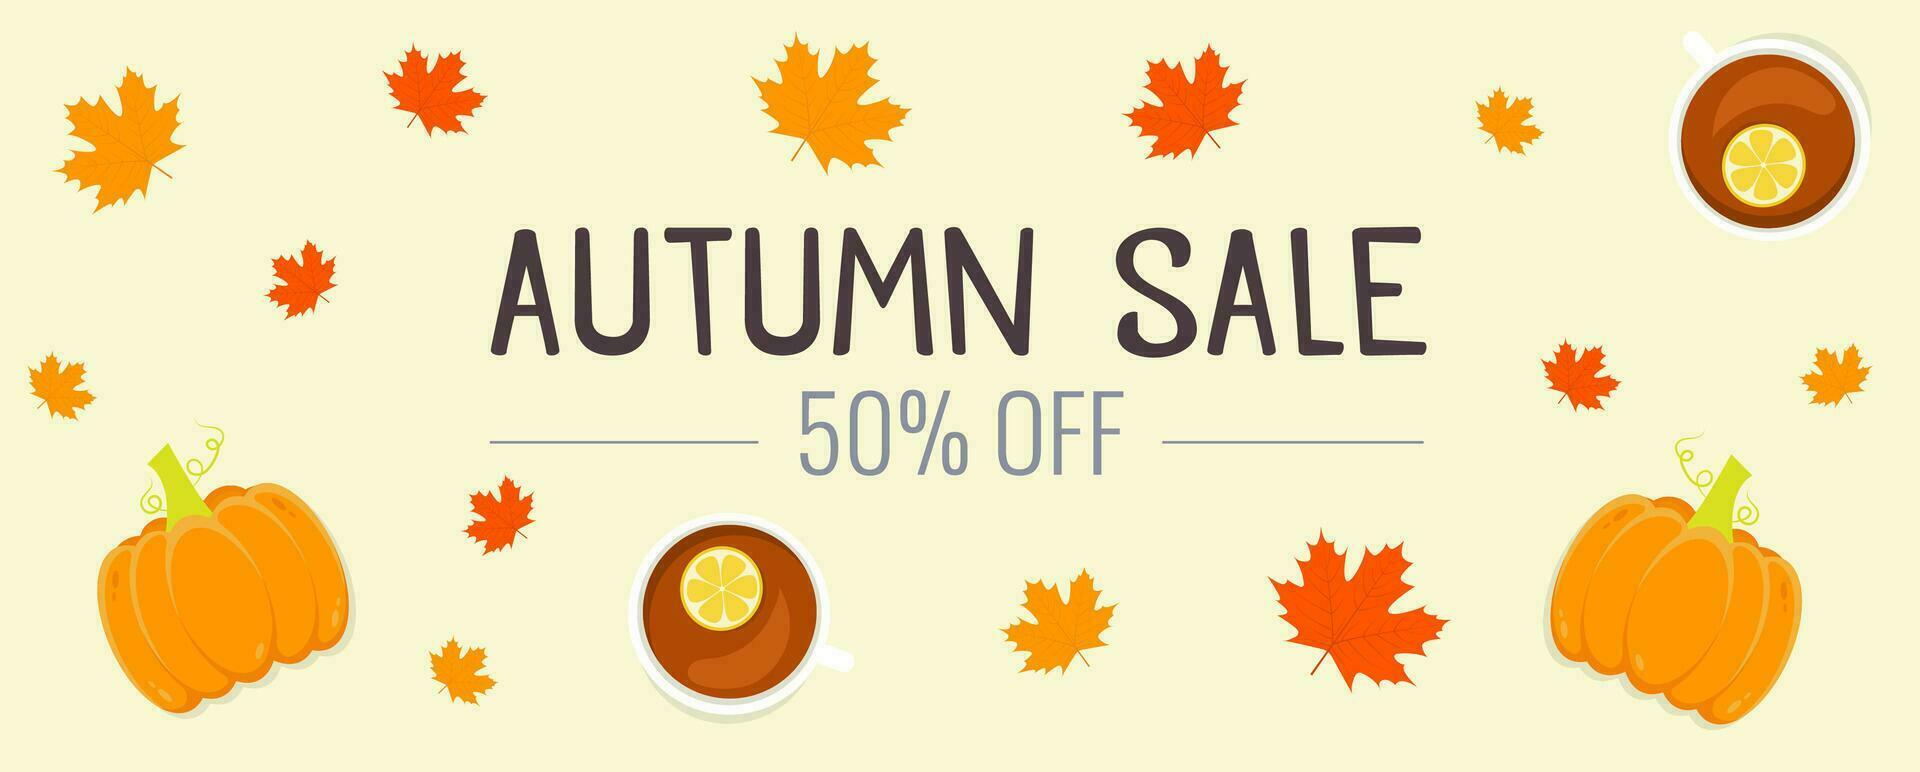 Autumn sale banner with pumpkin and maple leaf vector